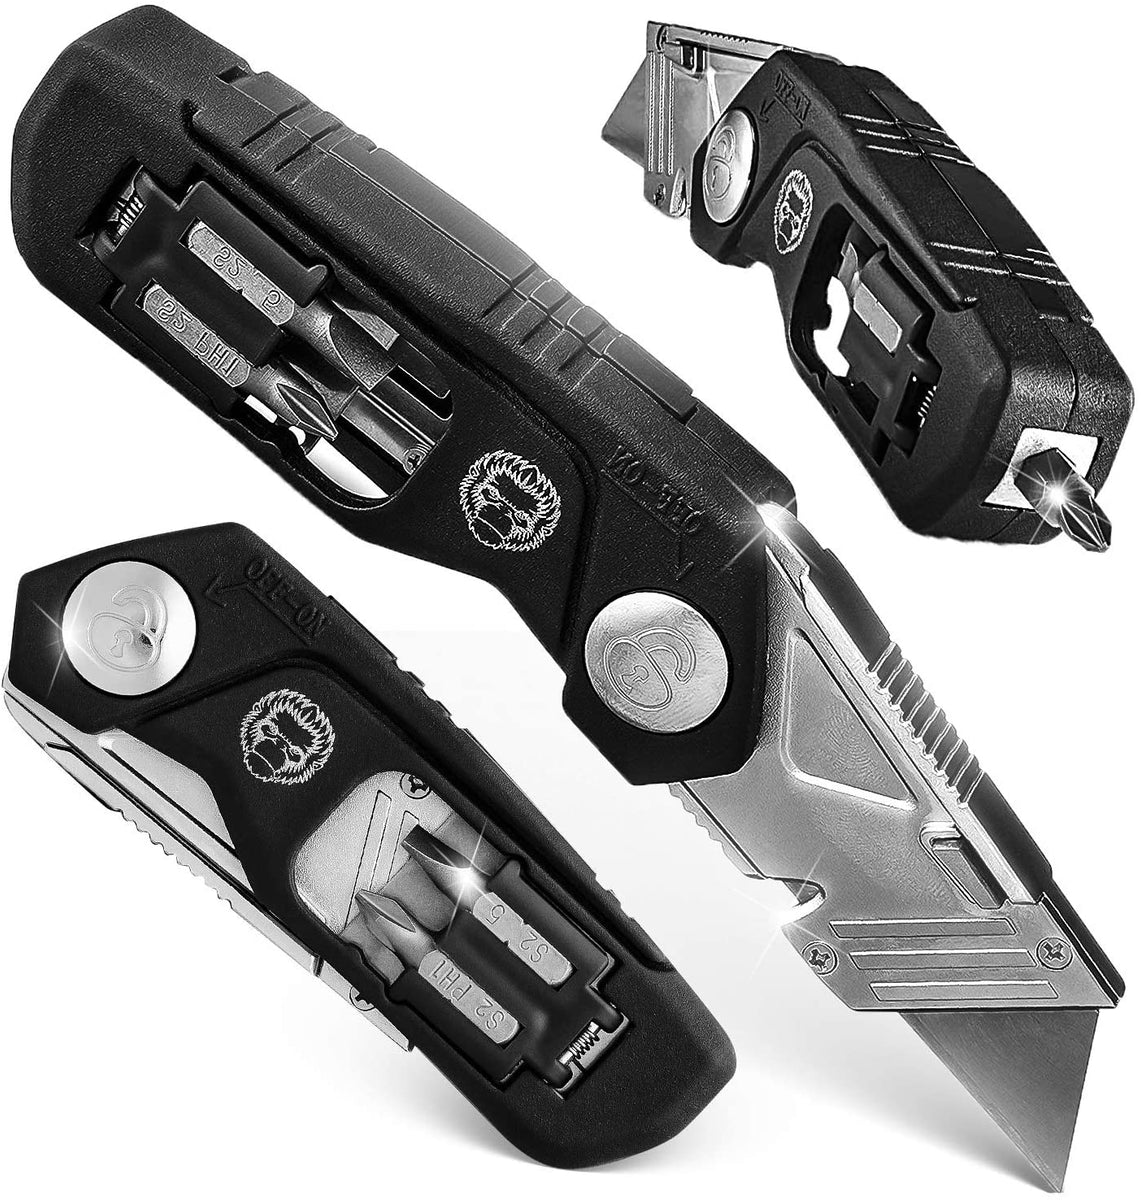 Tonife Multi-function Box Opener Box Cutter Mini Rescue Knife With